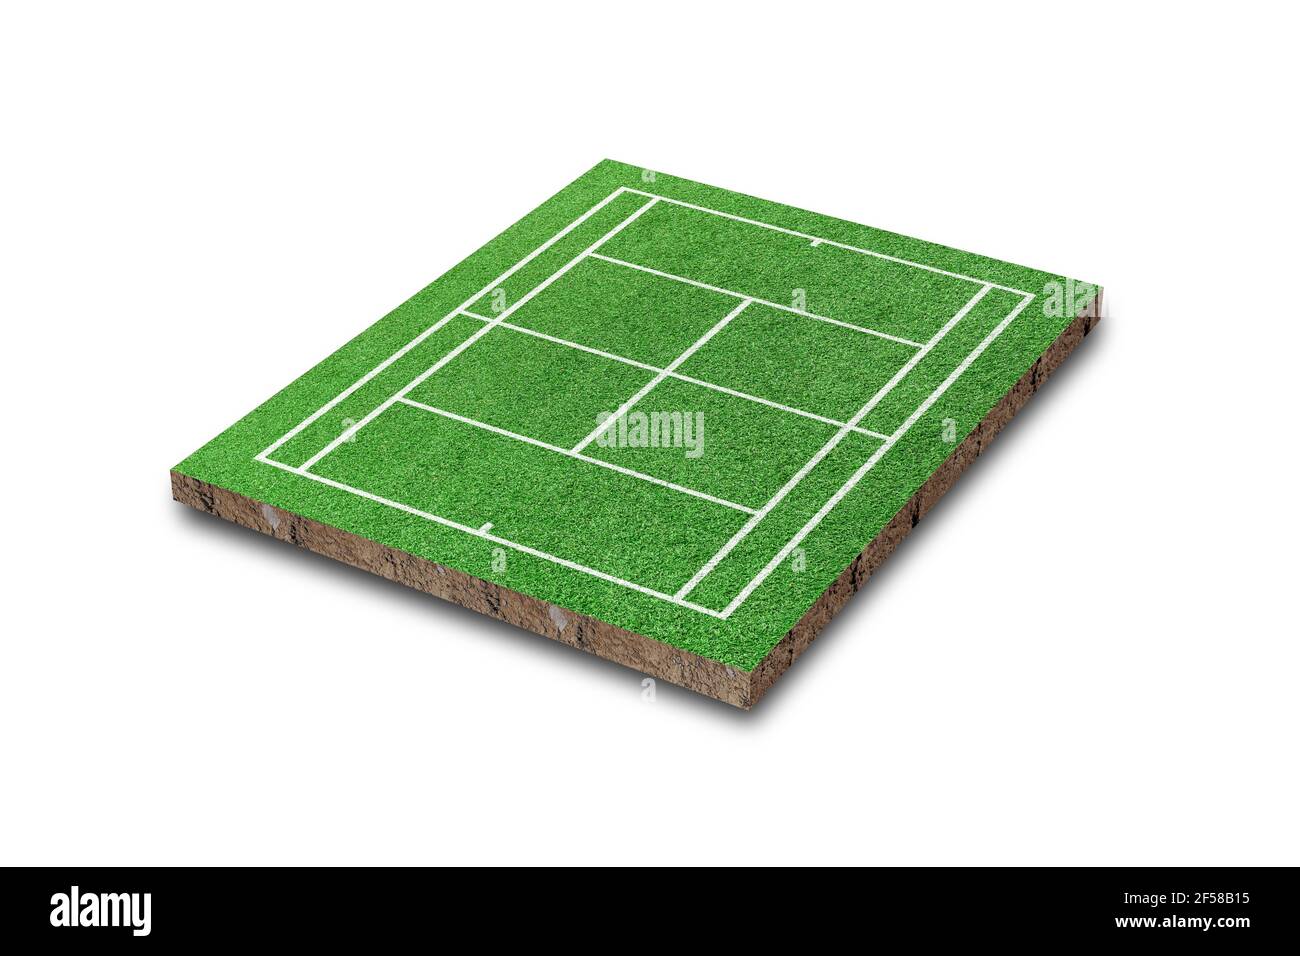 Tennis court isolated on white background. Green grass realistic. 3D rendering Stock Photo